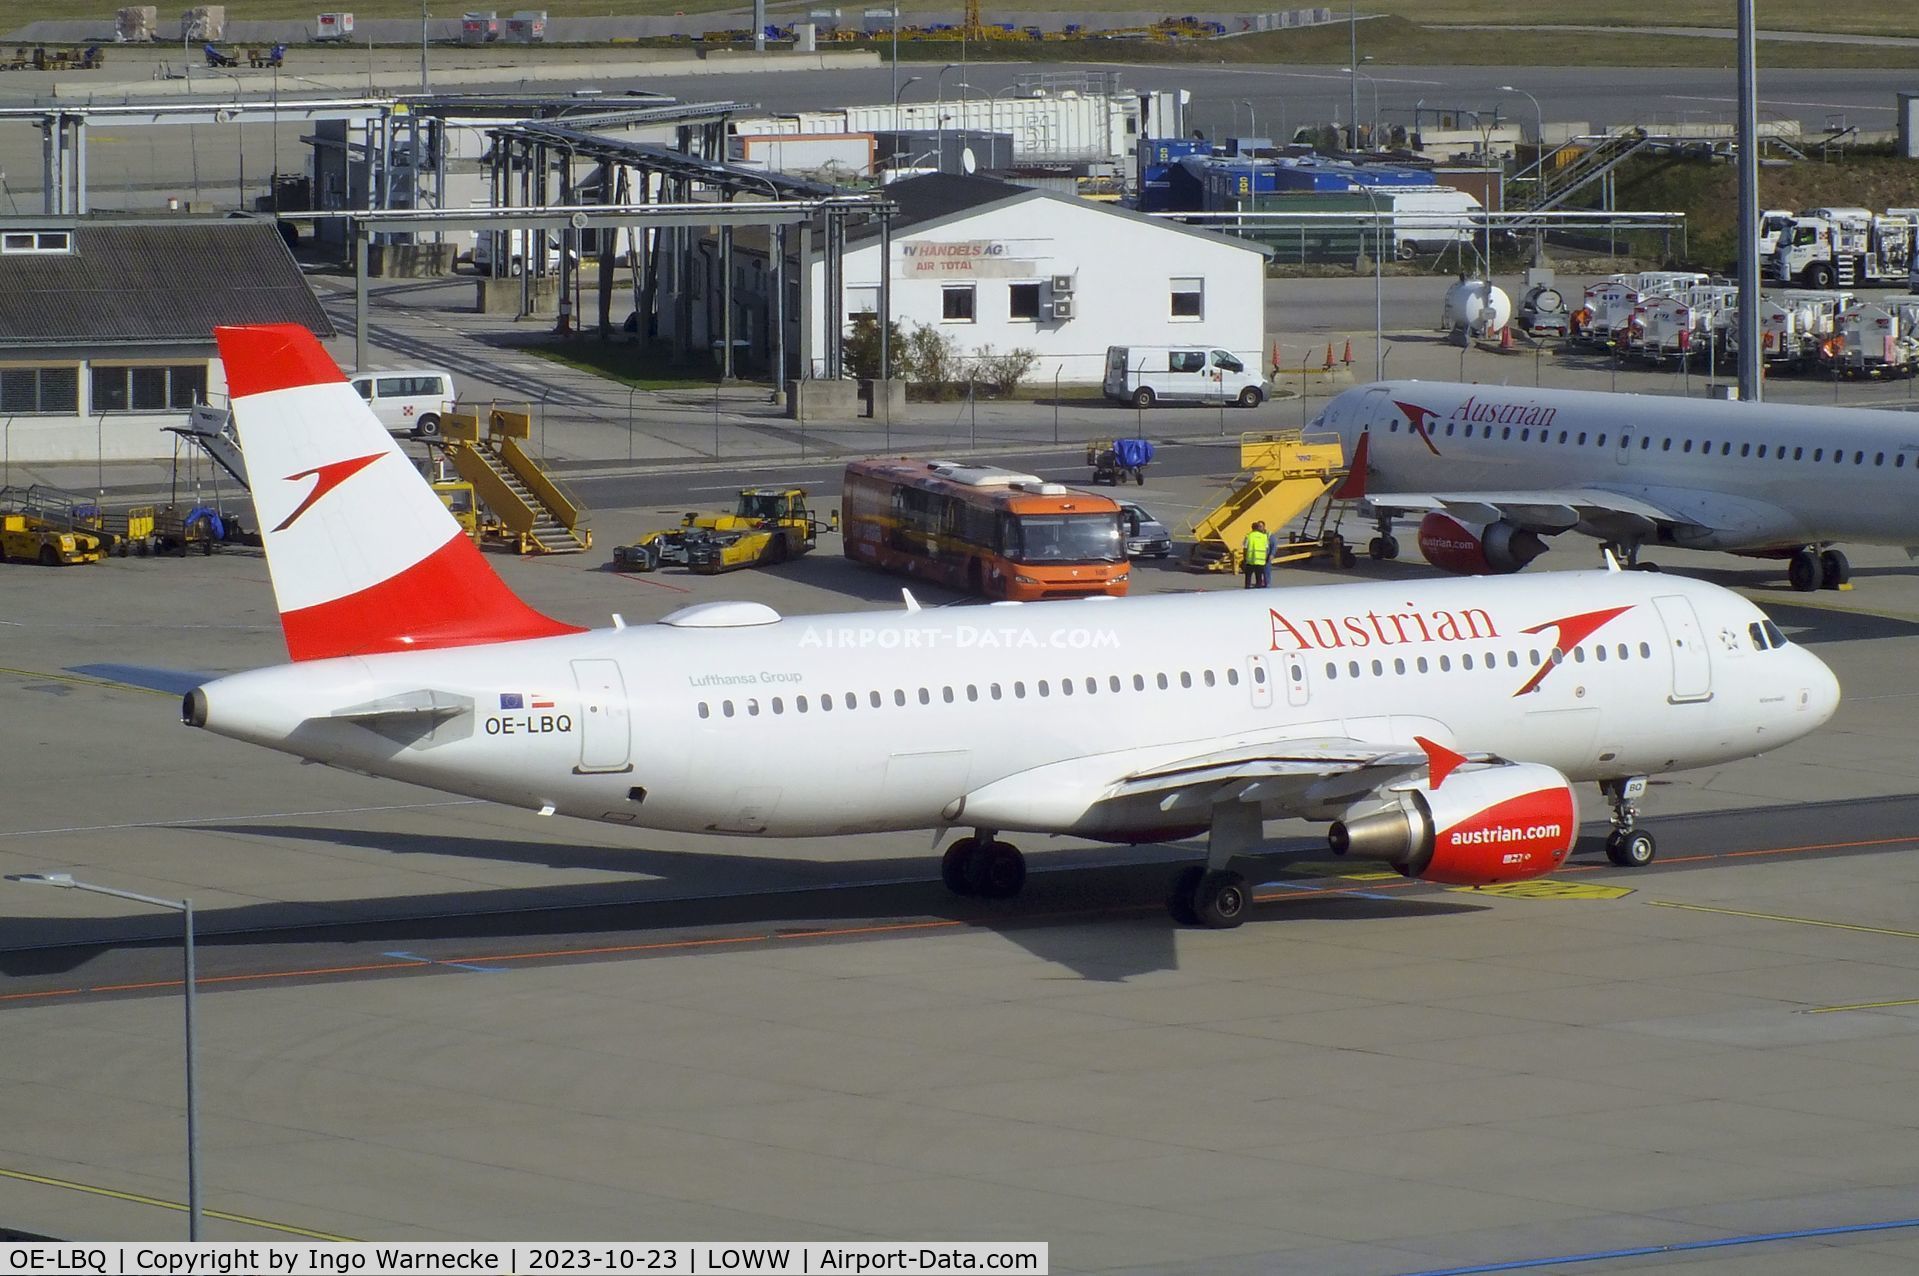 OE-LBQ, 1999 Airbus A320-214 C/N 1137, Airbus A320-214 of Austrian Airlines at Wien-Schwechat airport